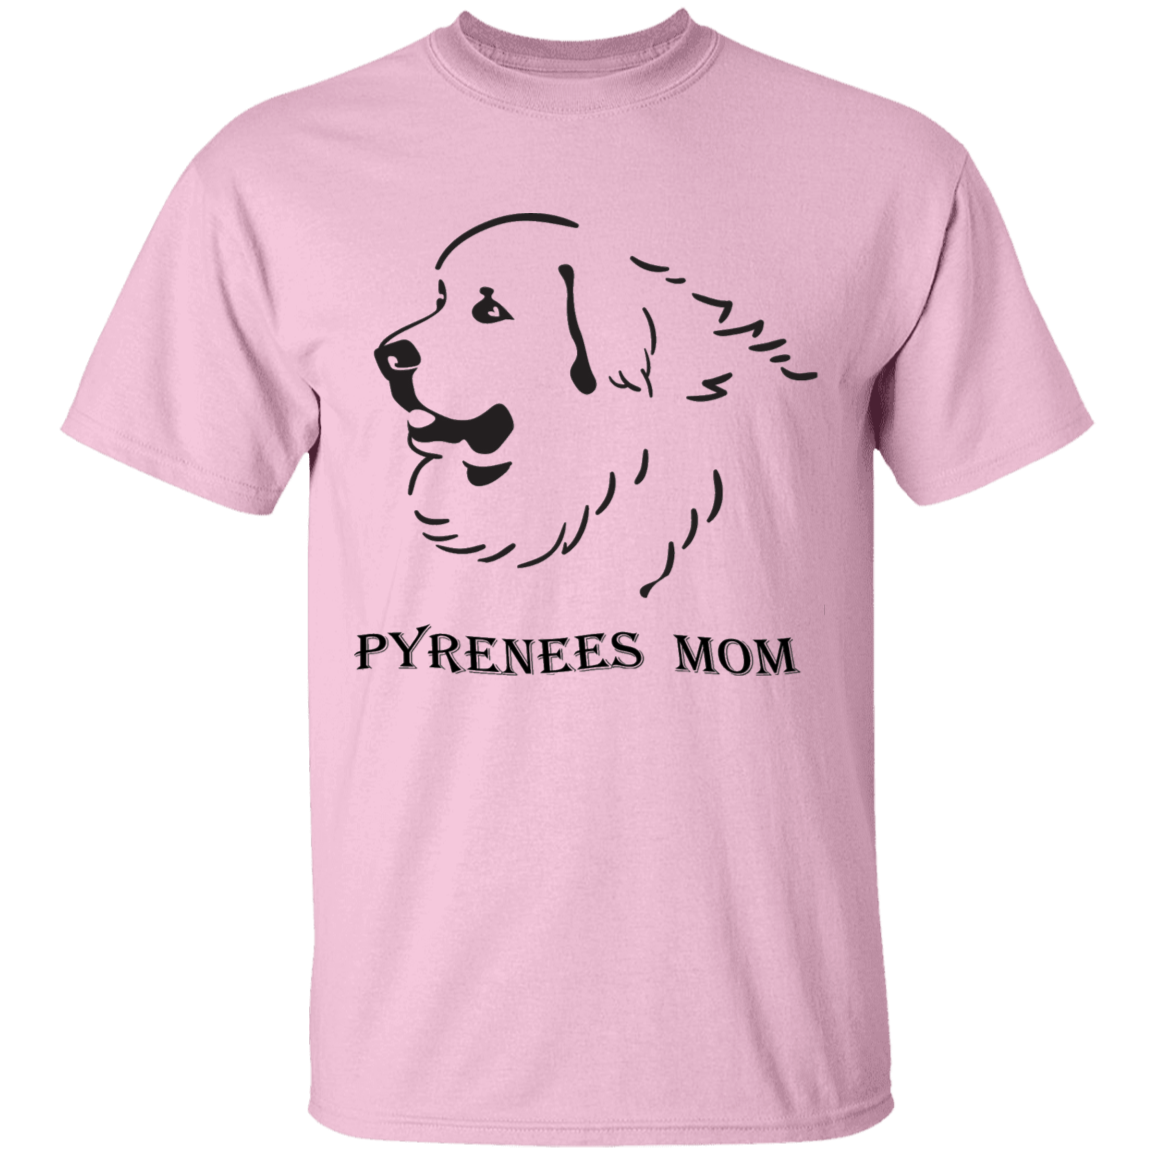 Great Pyrenees Mom T-Shirt